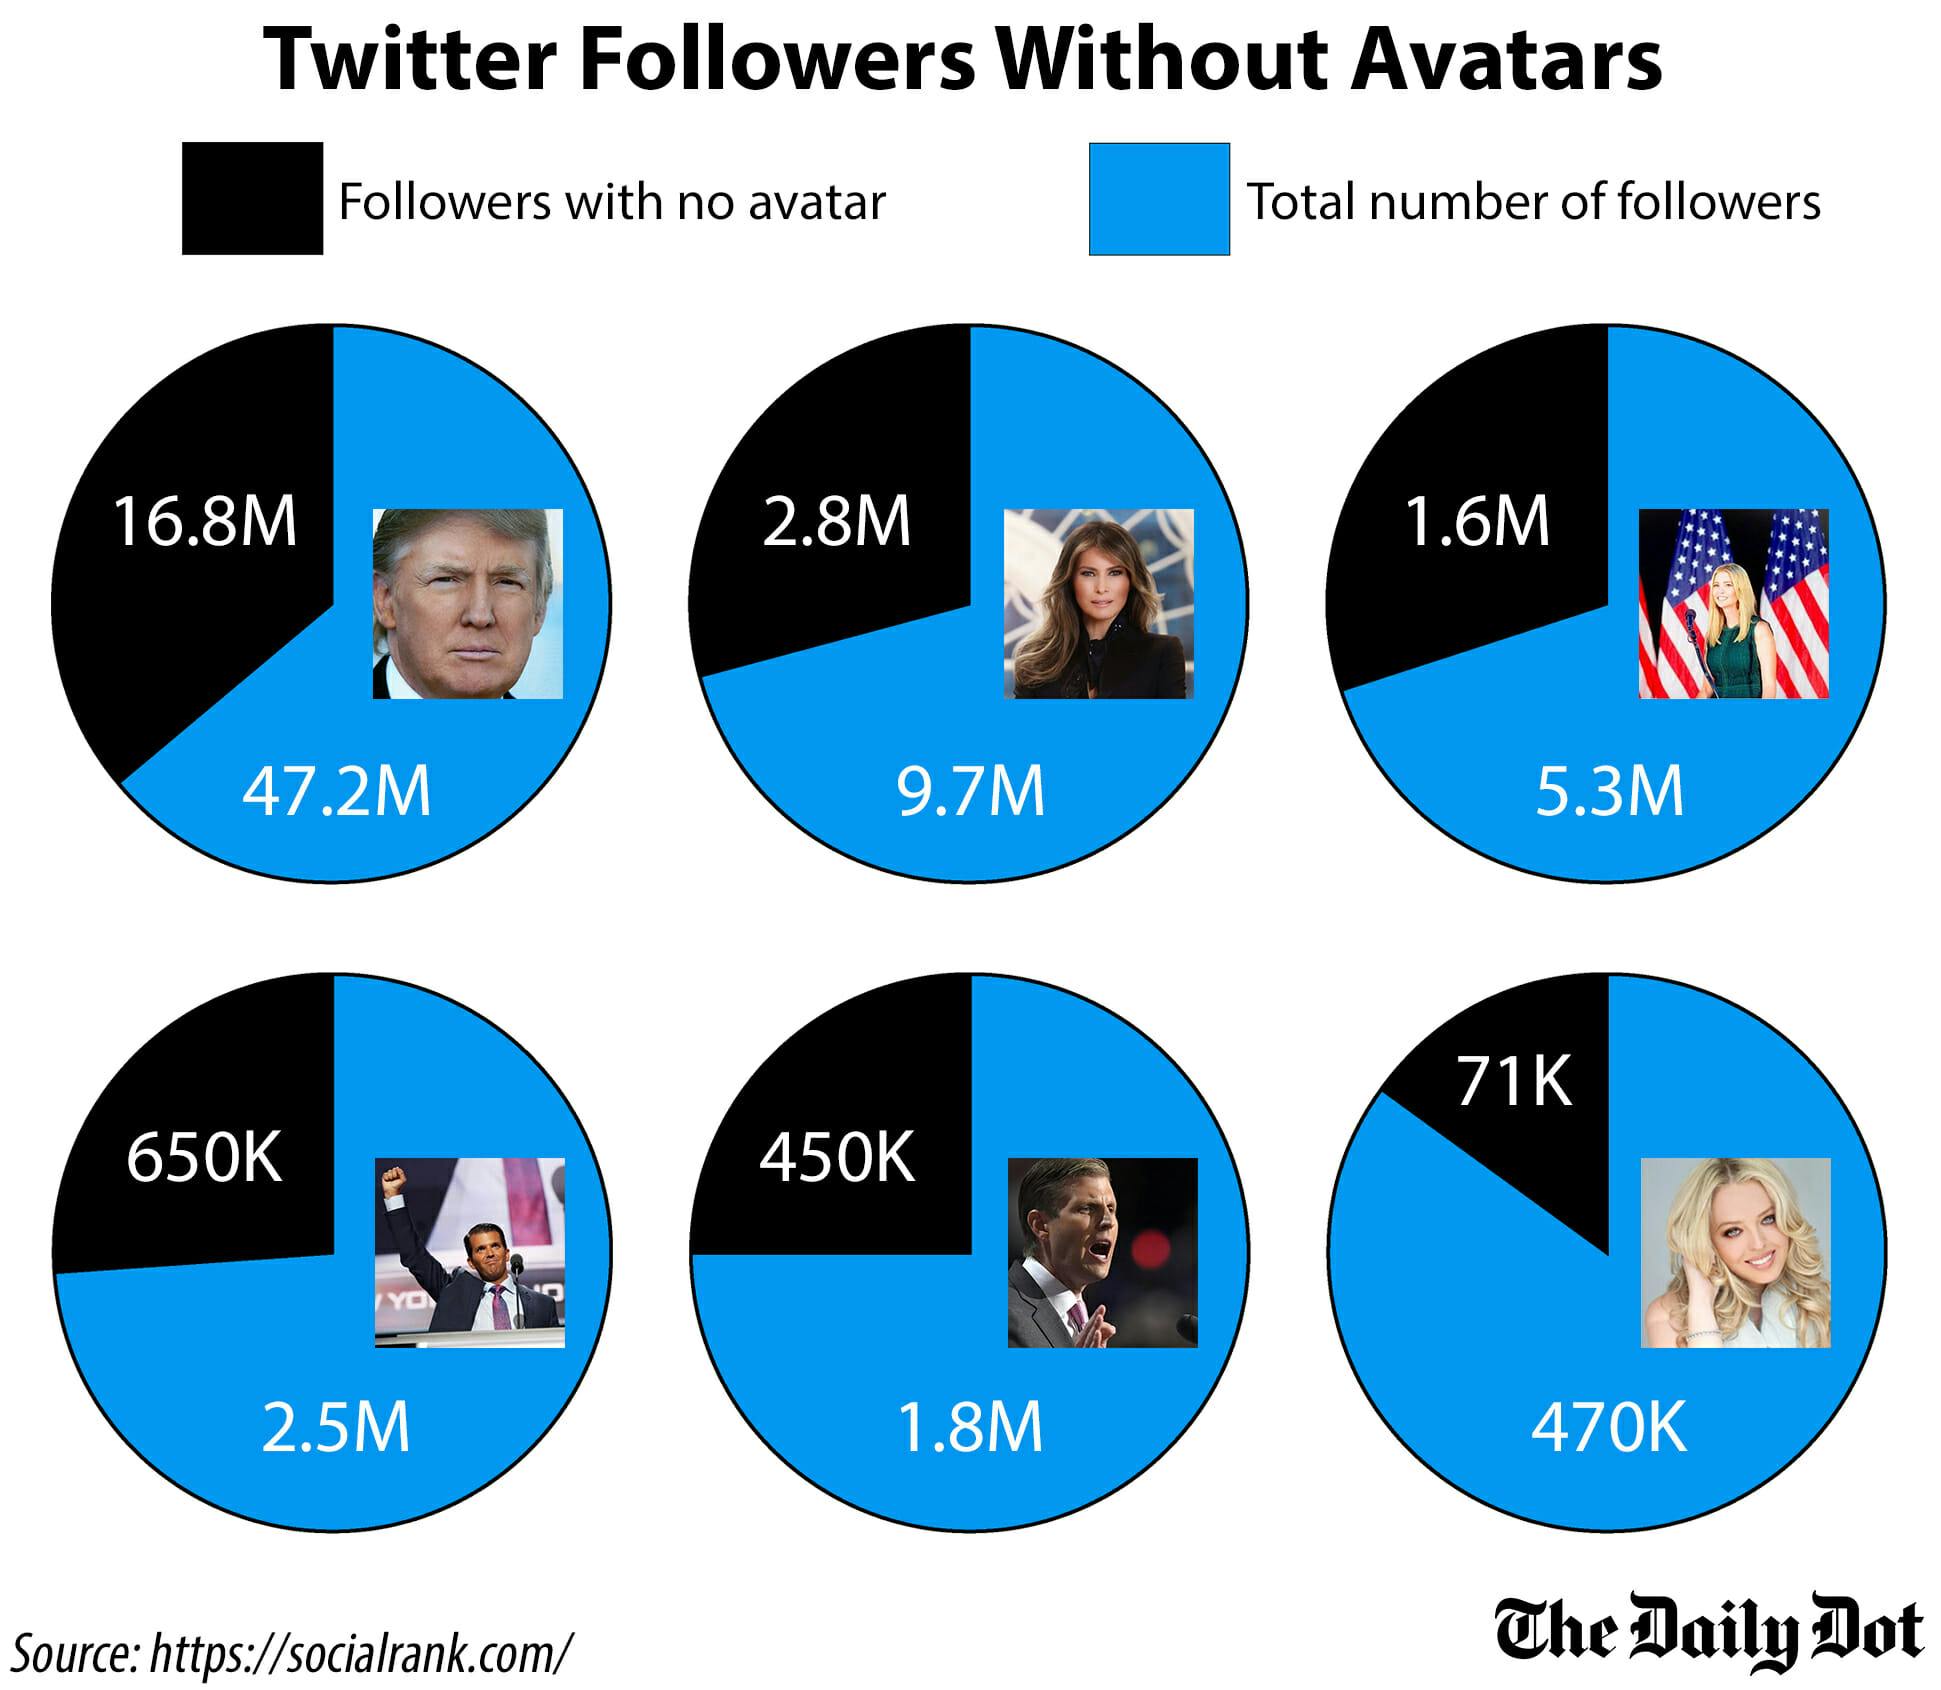 Trump family Twitter followers without avatars